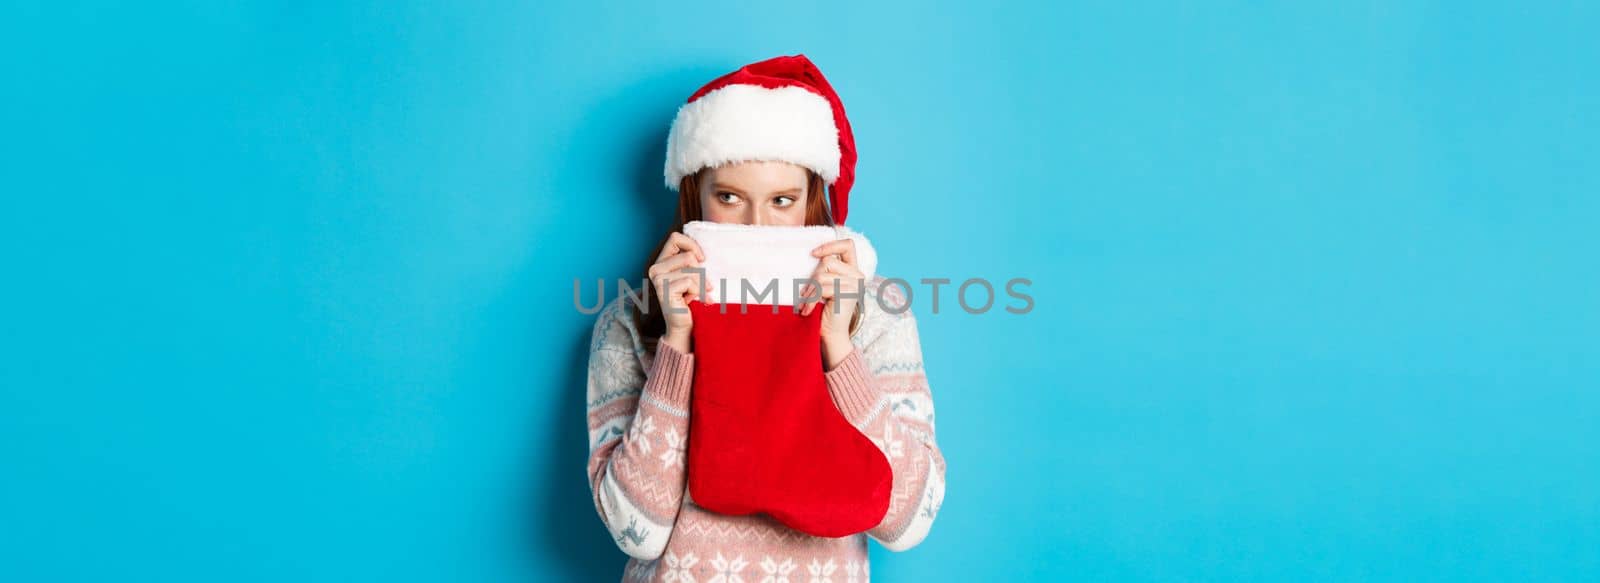 Cute girl cover face with christmas stocking, staring right with cunning gaze, standing in Santa hat and celebrating winter holidays, blue background.